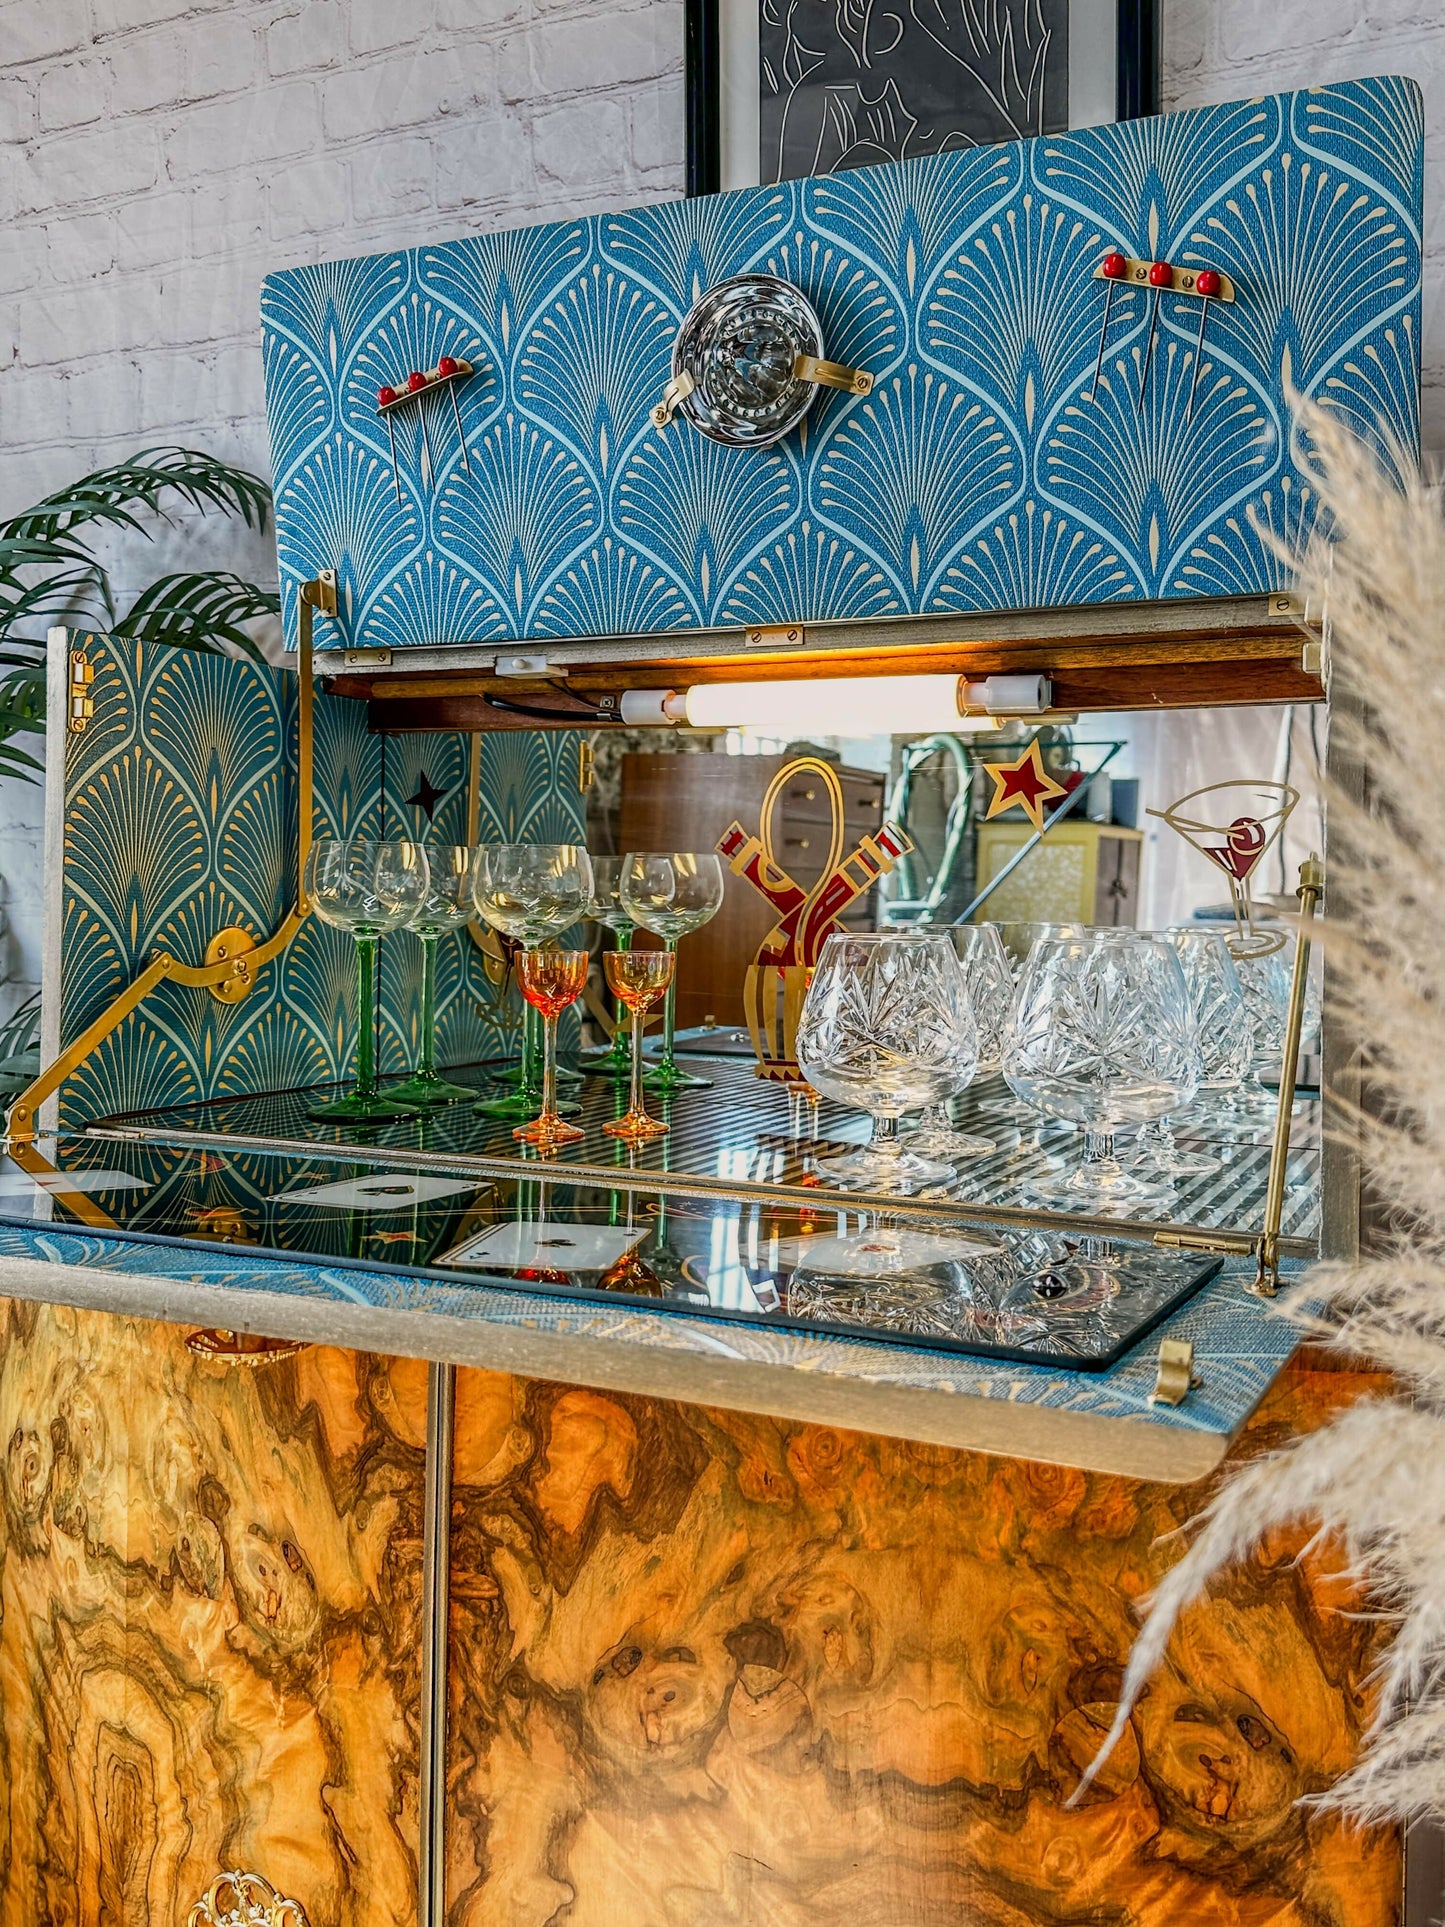 Cocktail Cabinet, Vintage Drinks Bar, Teal and Gold, Art Deco, 1950’s Drinks Unit, Retro Bar, Walnut MADE TO ORDER